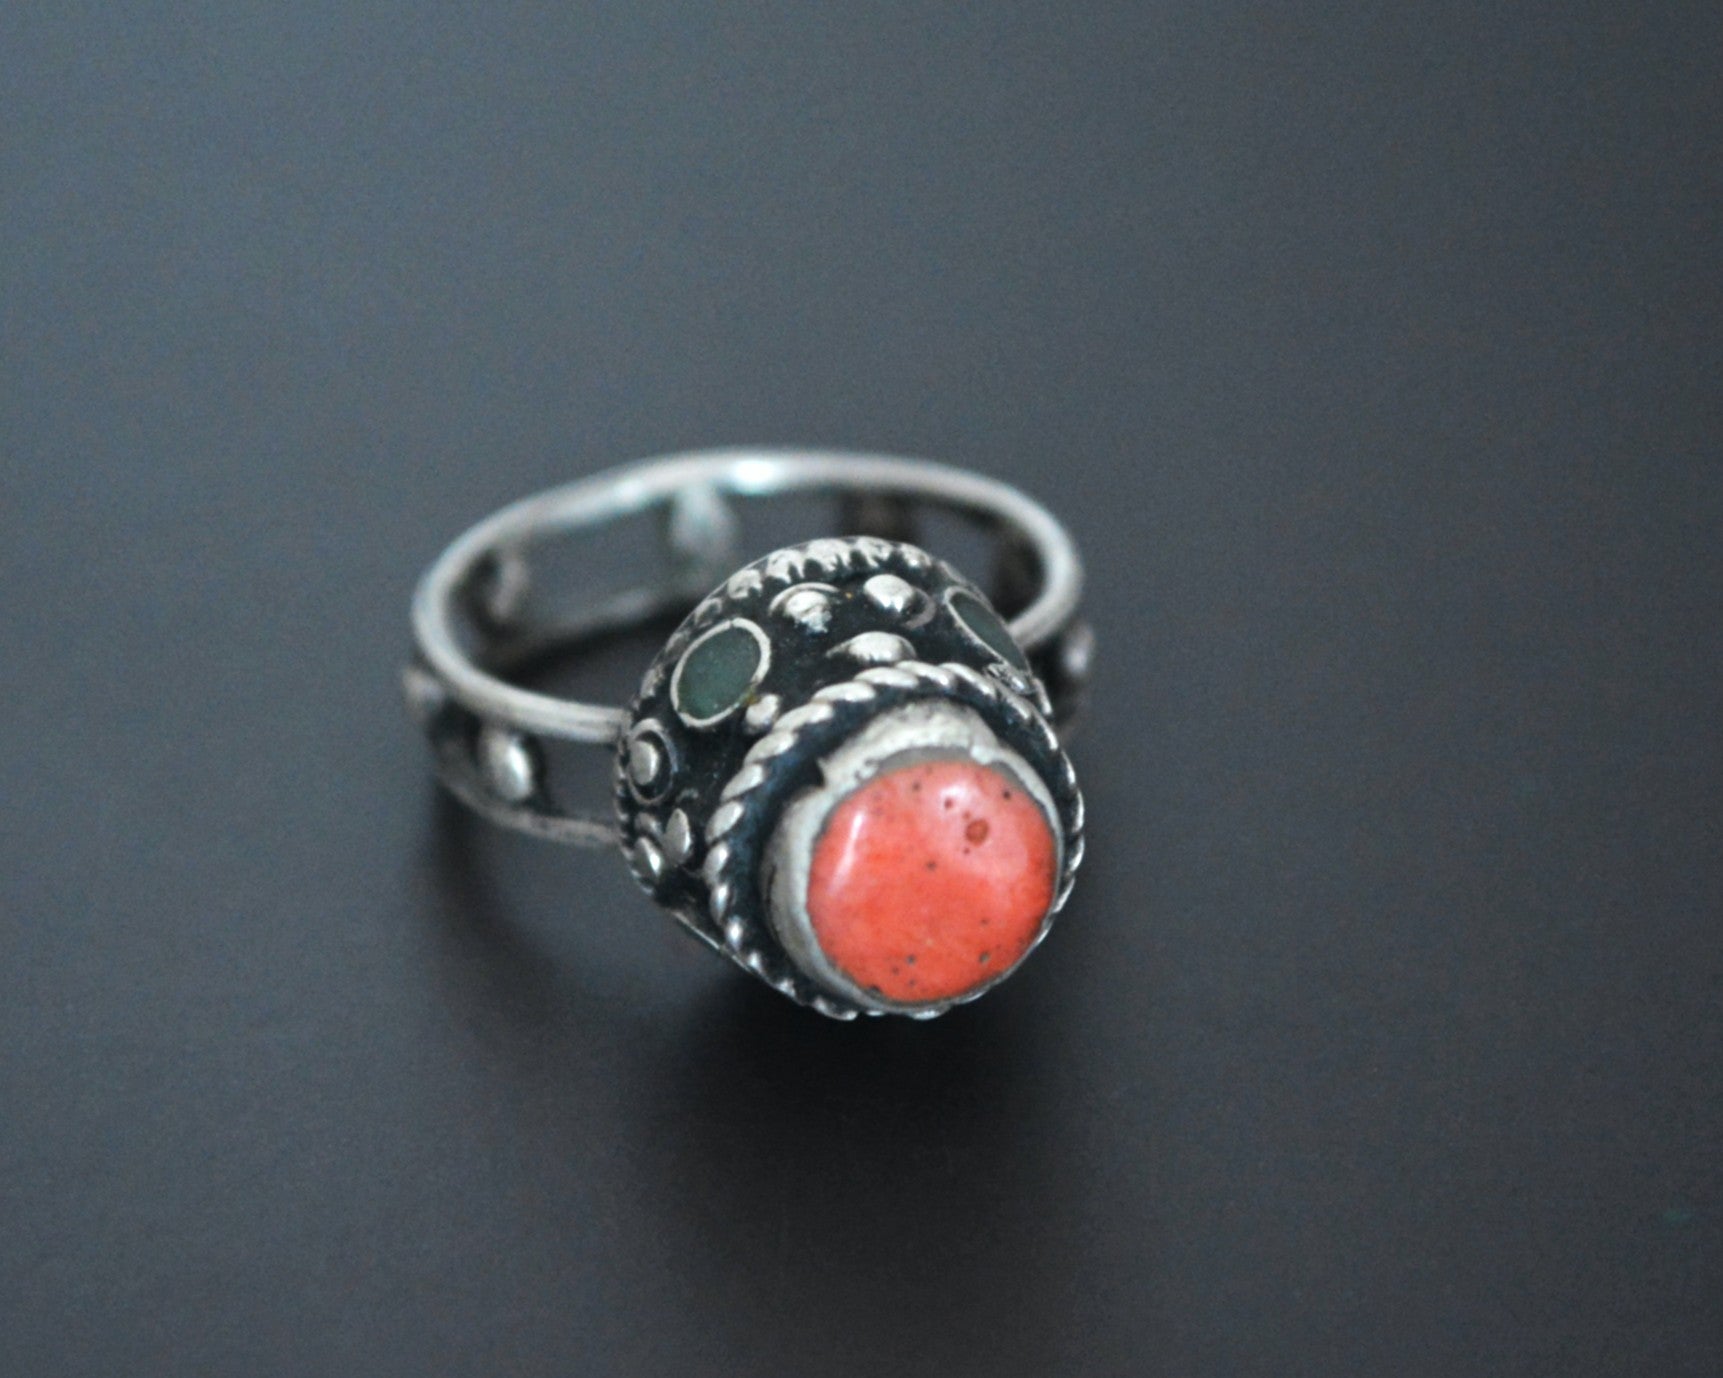 Reserved for R. - Old Afghani Coral Ring - Size 7